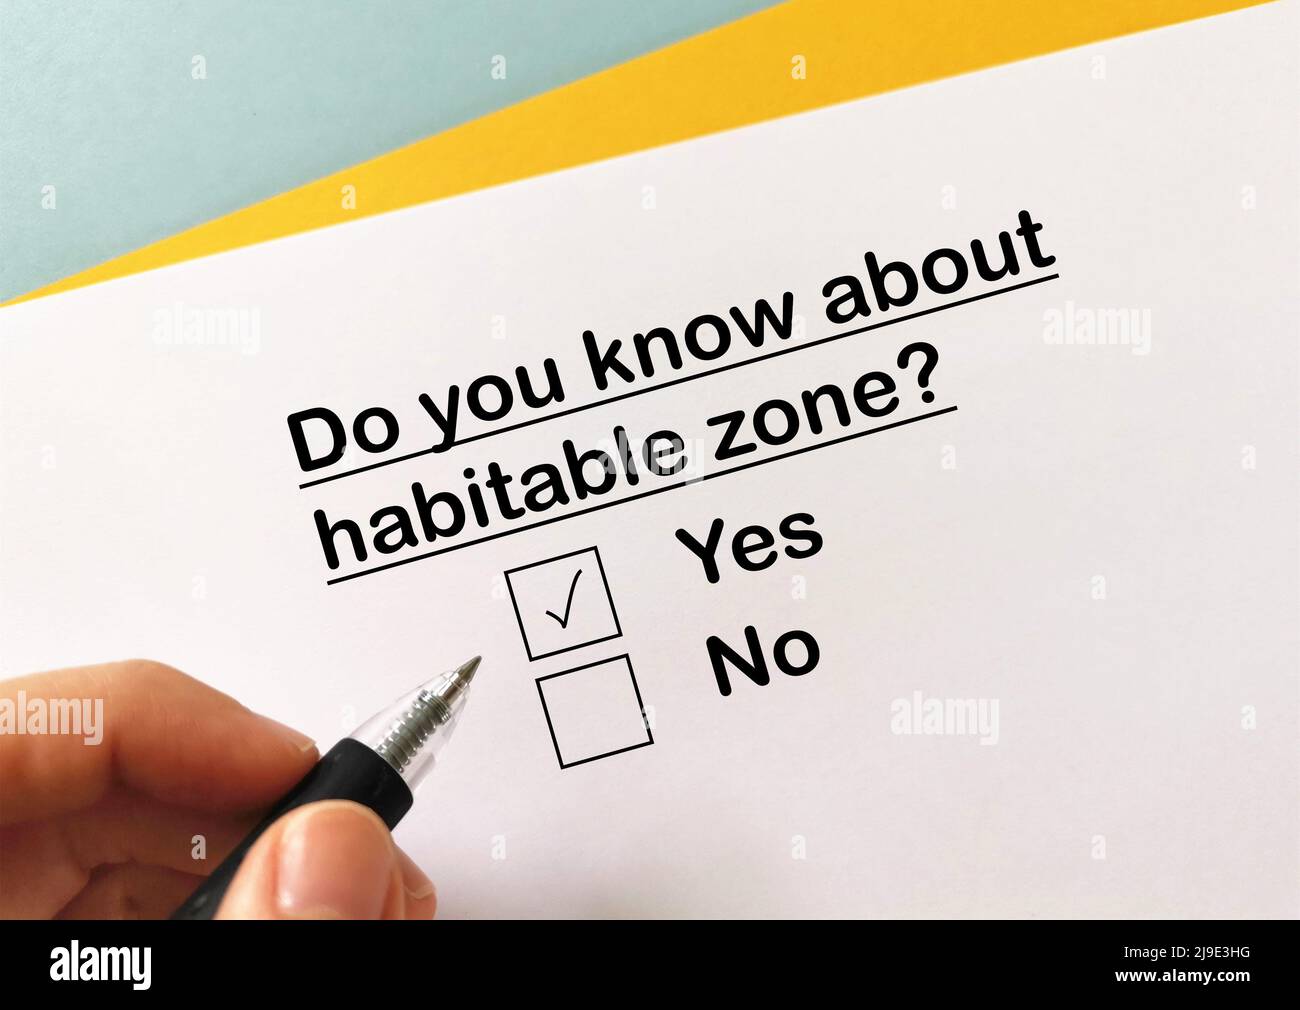 One person is answering question about space technology. He knows about habitable zone. Stock Photo